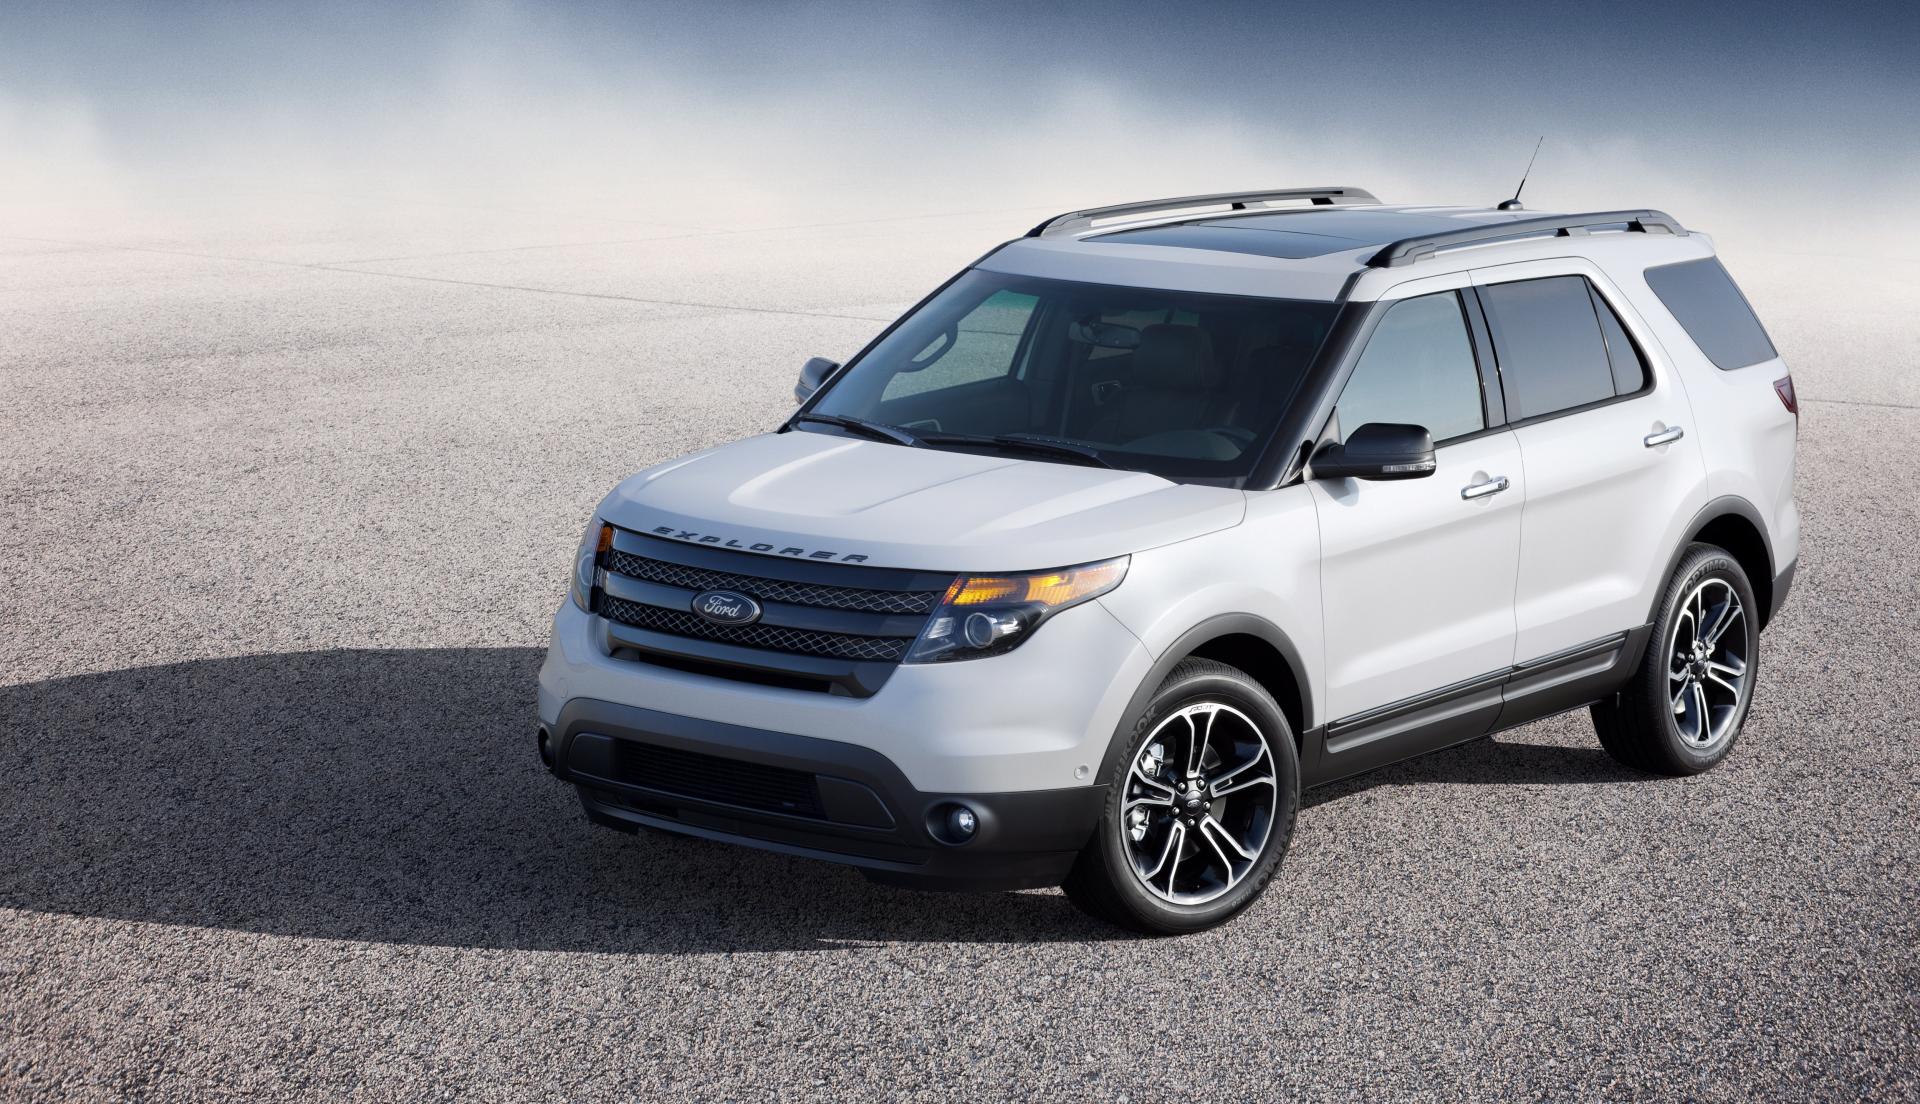 2013 Ford Explorer Sport Image Photo 7 of 41